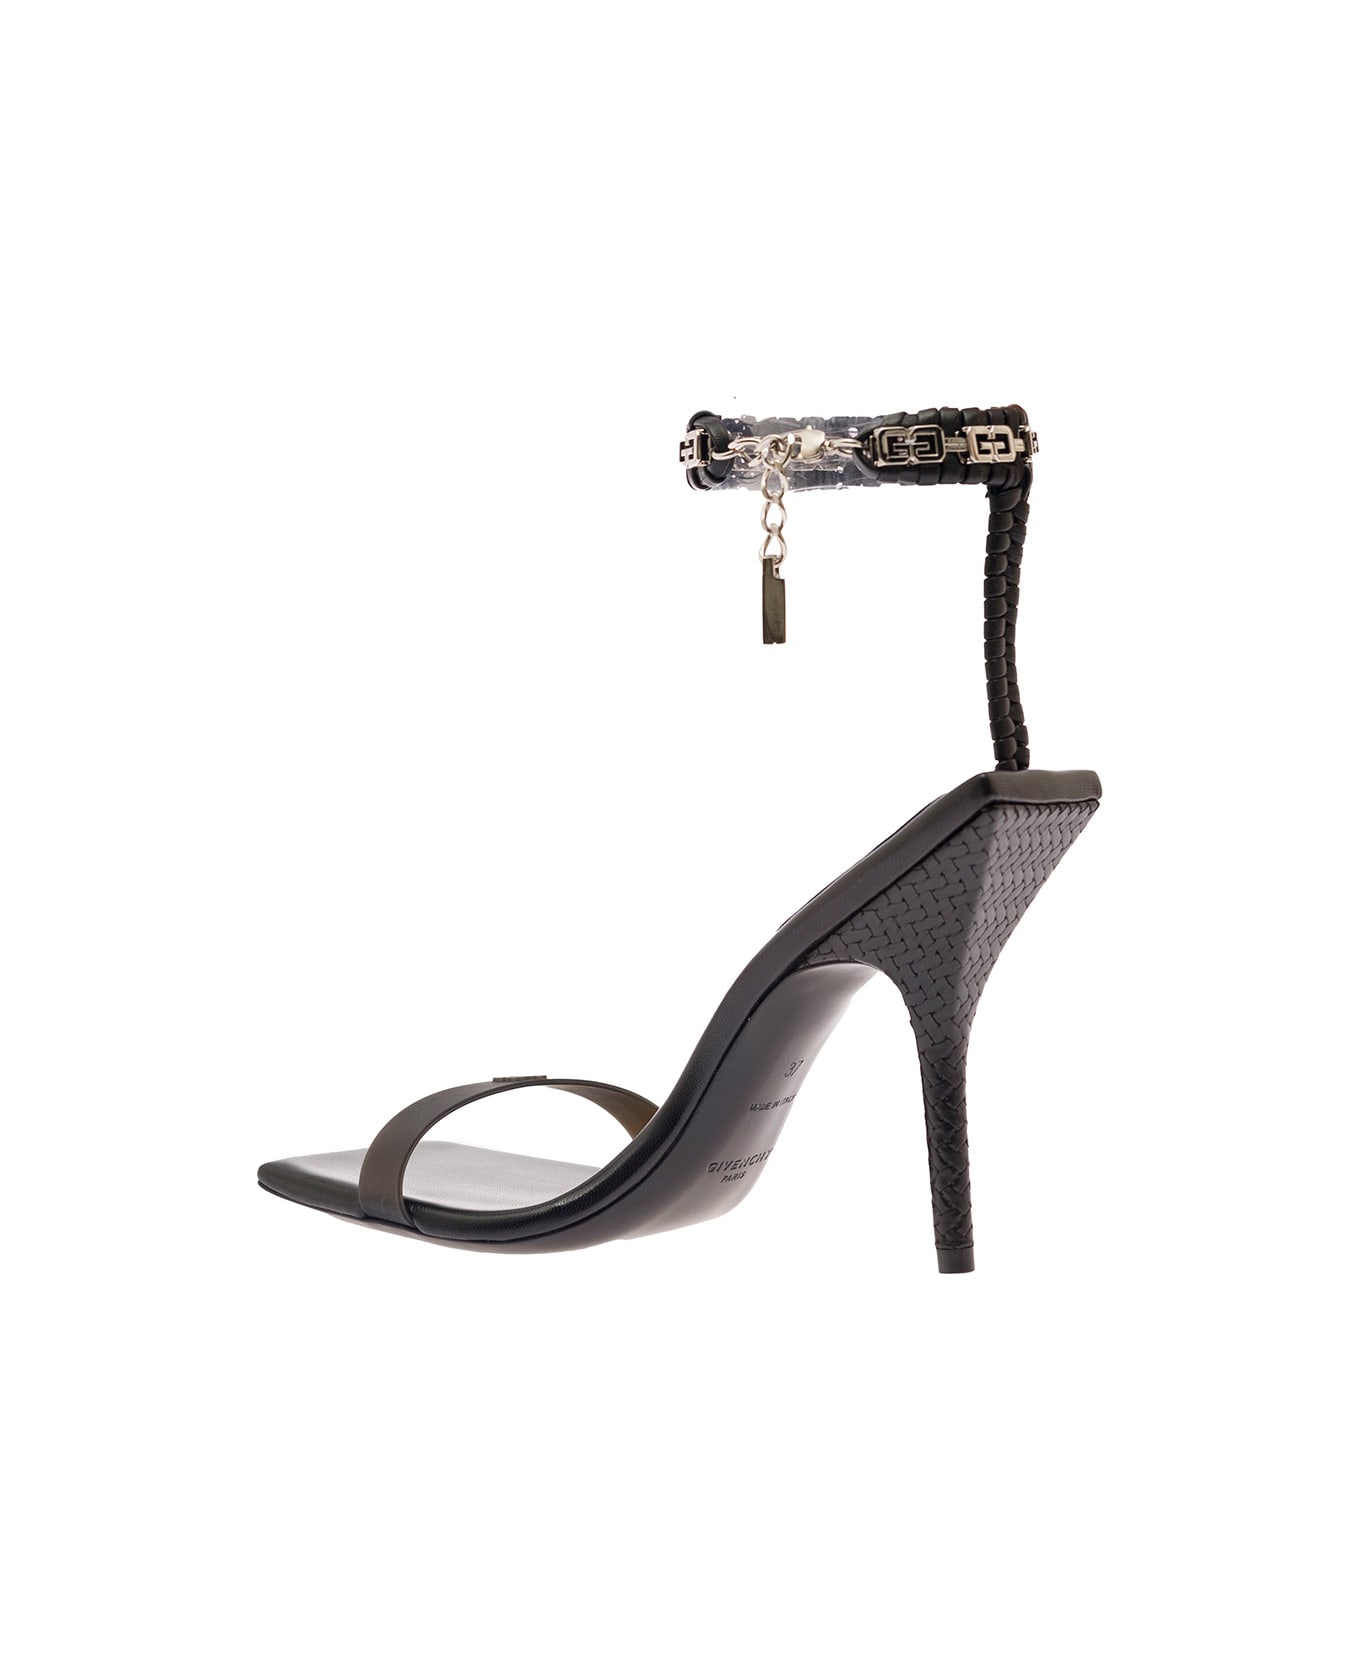 Givenchy Sandals With Embossed 4g Logo And Chain In Leather - Black サンダル